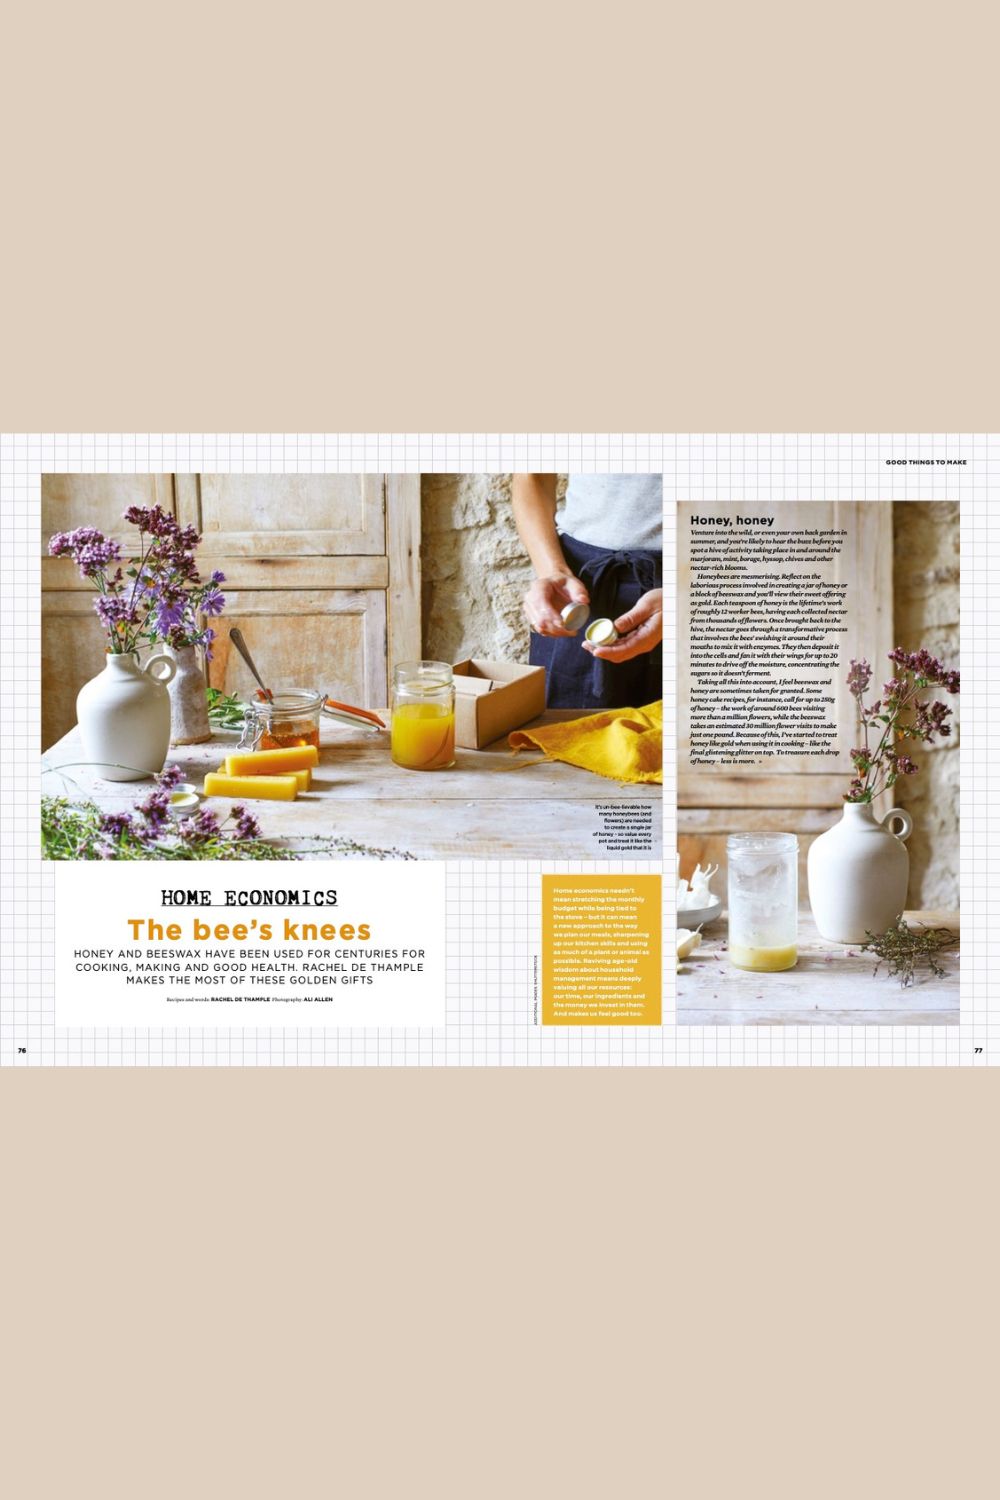 The Simple Things Issue 133 July